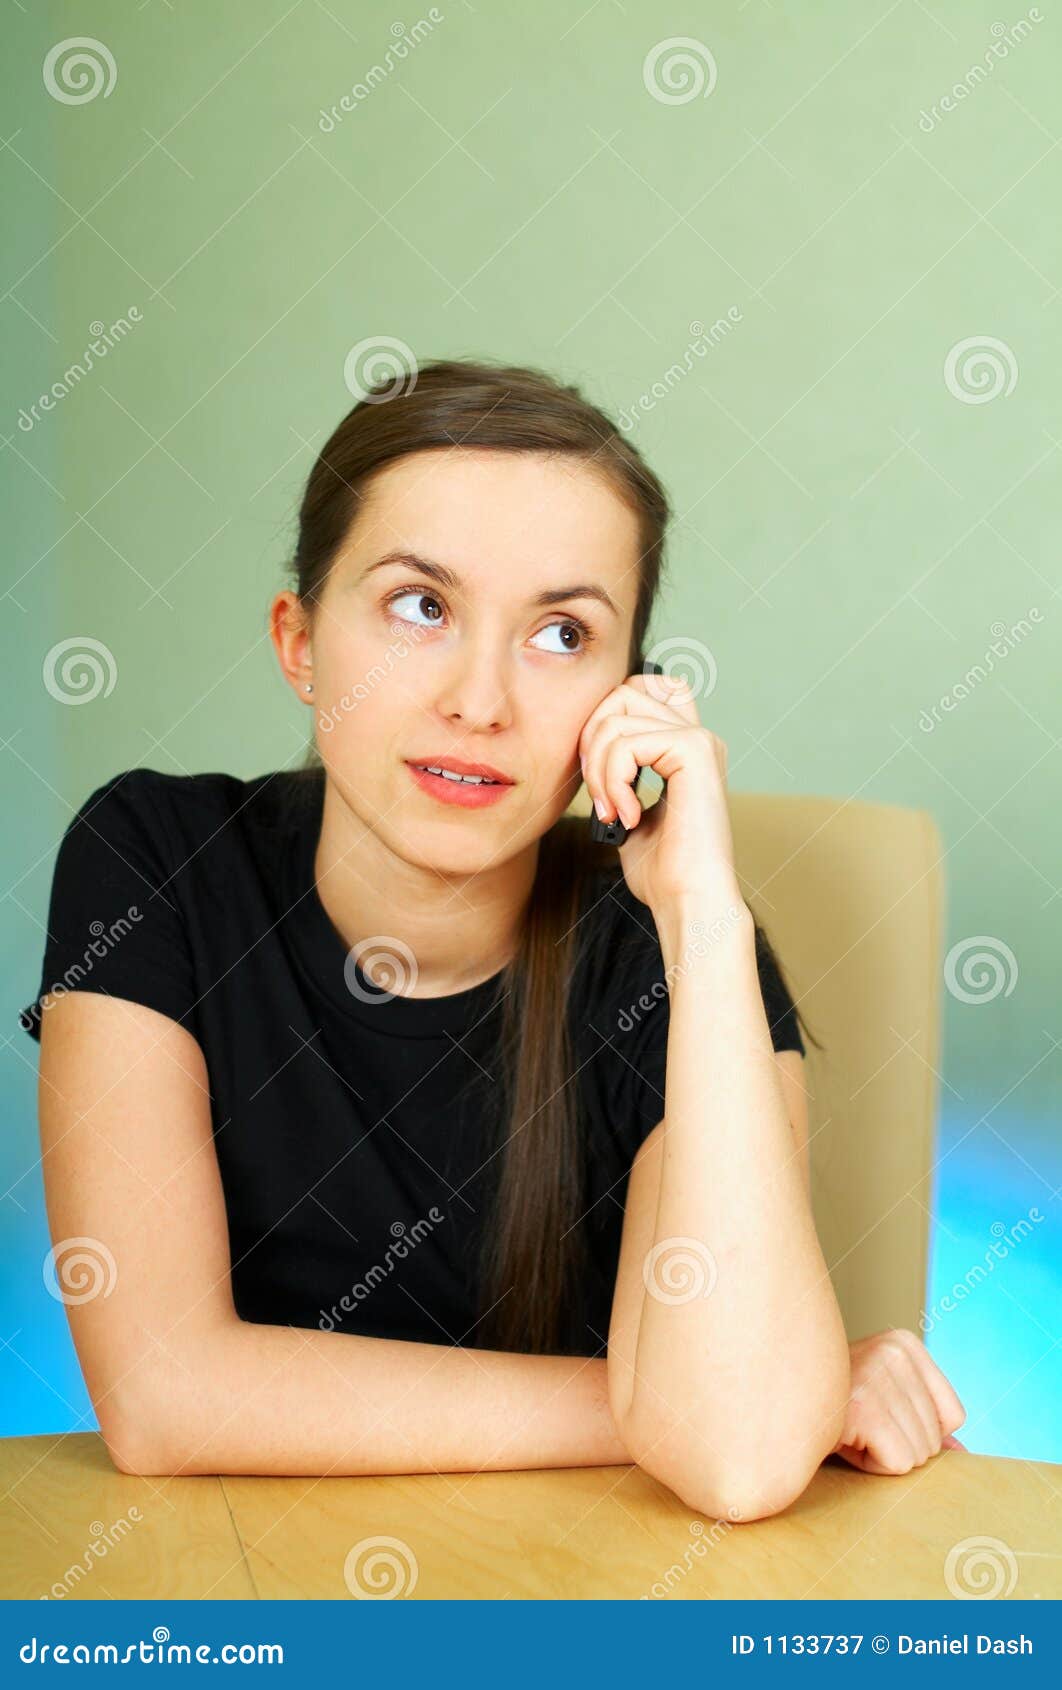 Talkin cell phone stock image. Image of expression, communication - 1133737